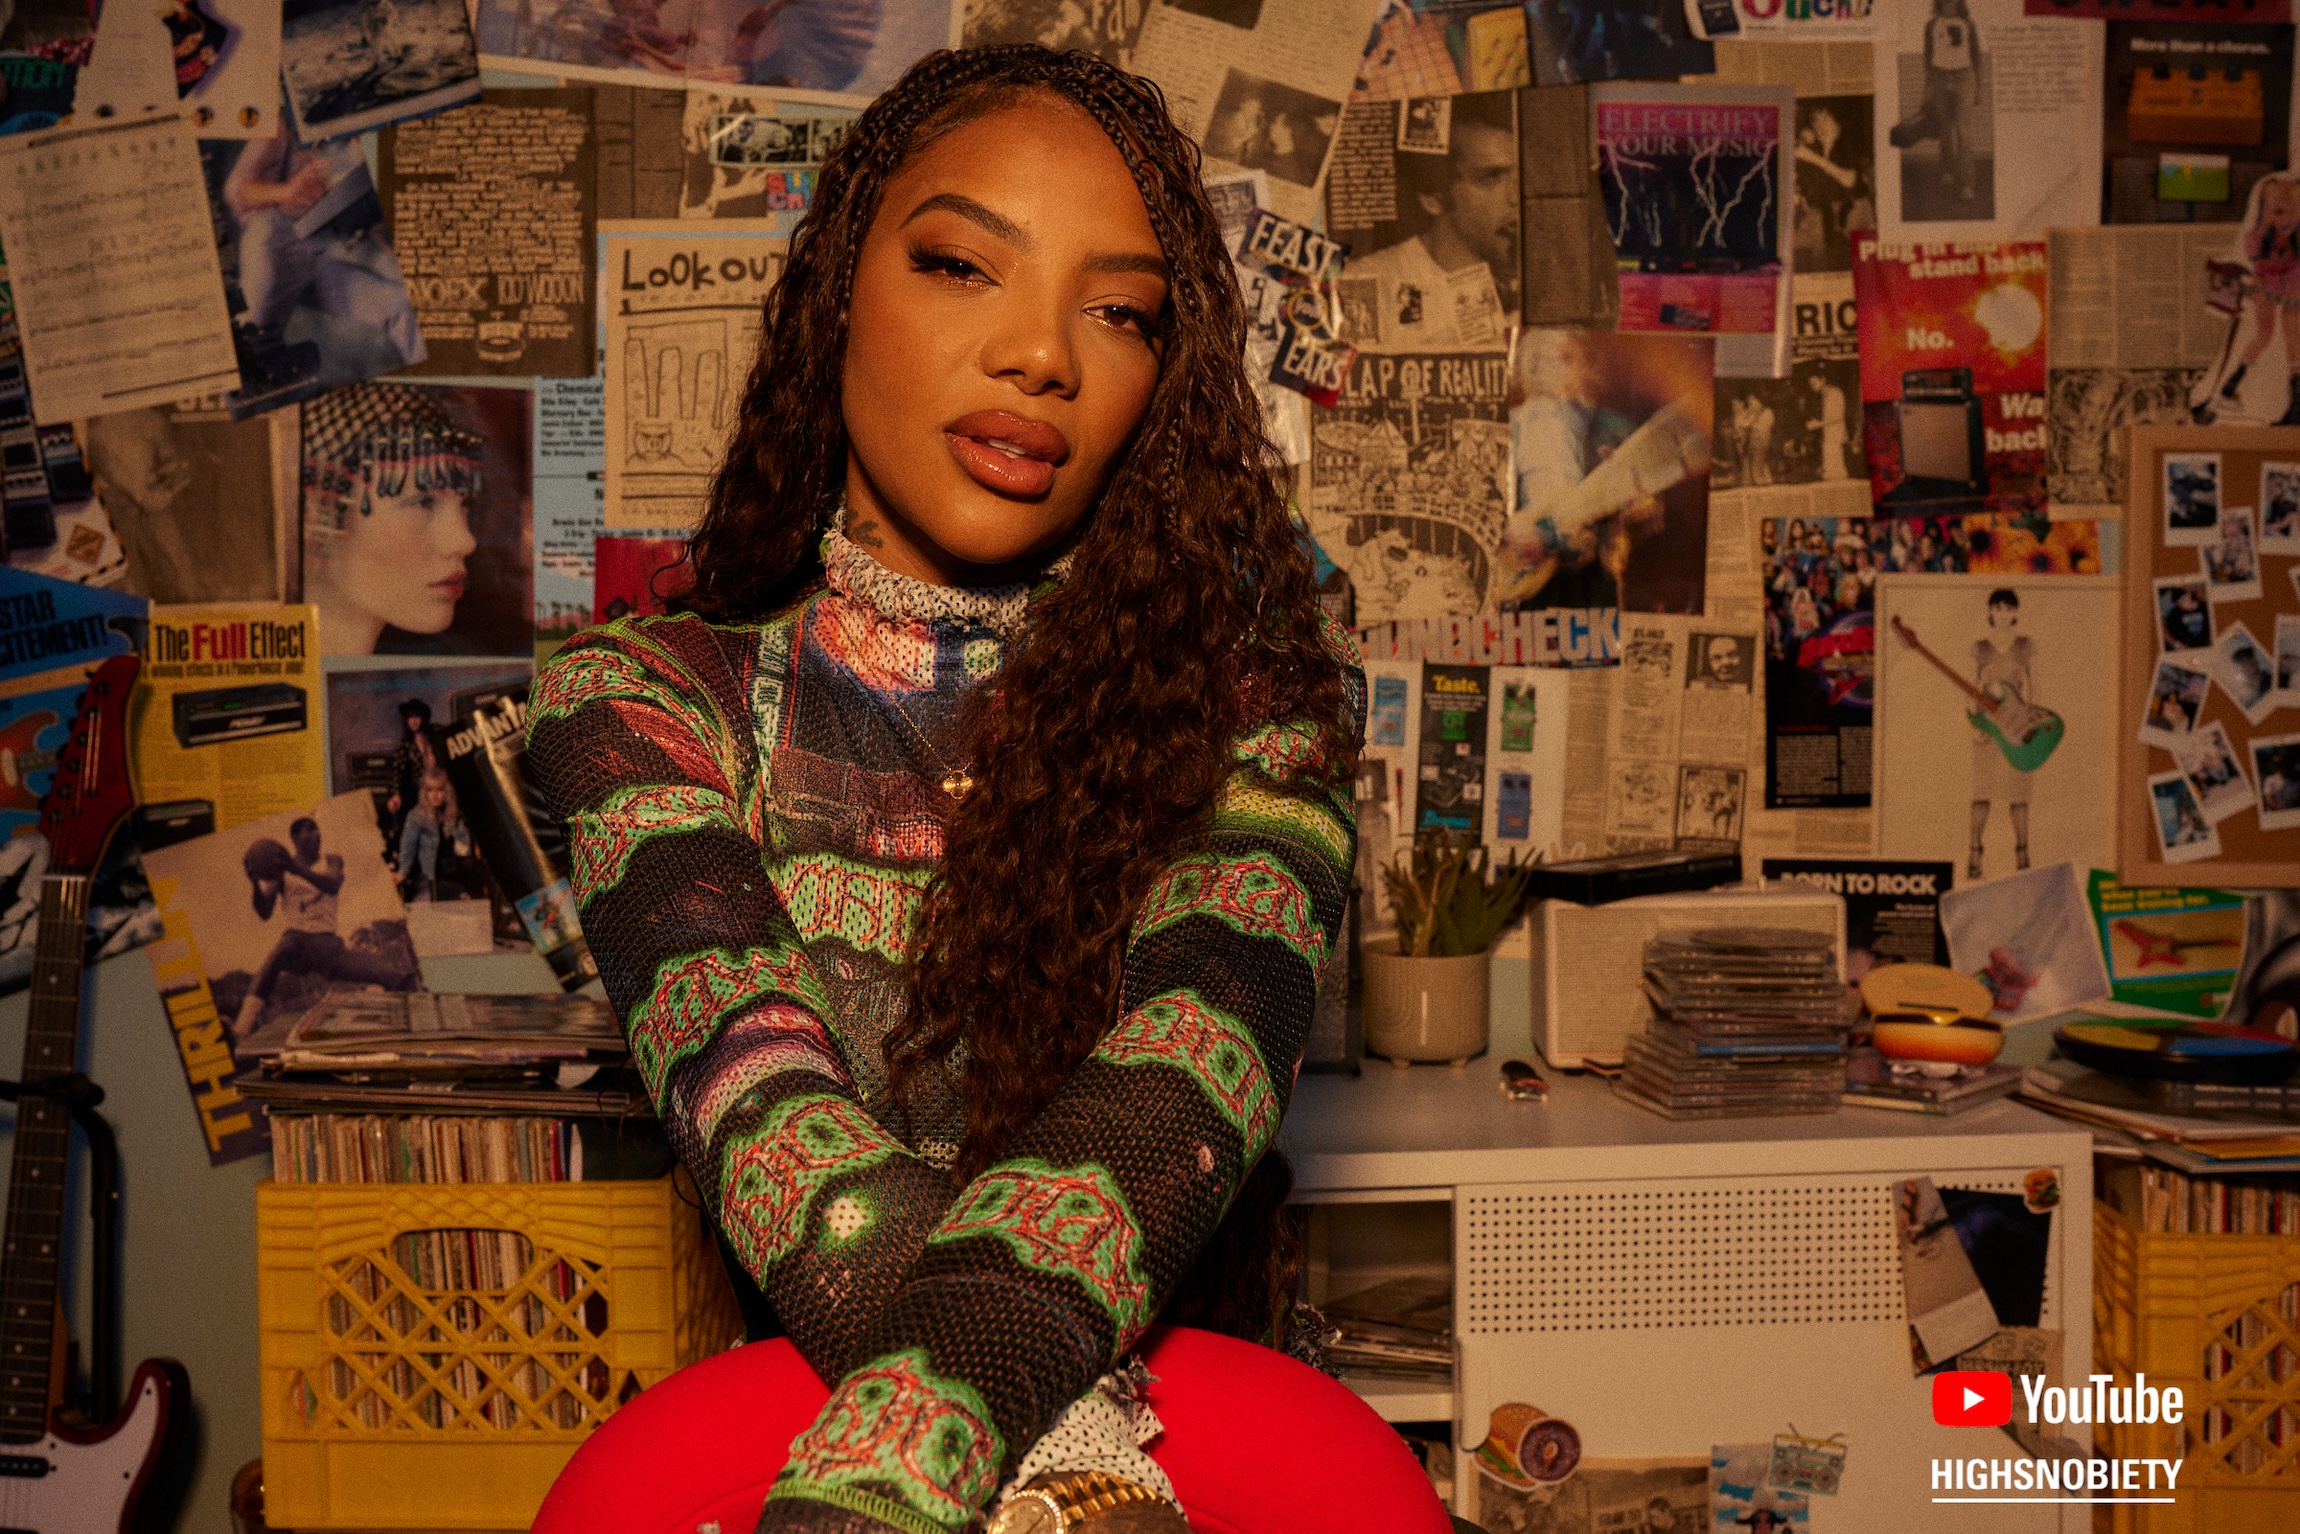 YouTube x Highsnobiety Weekend 2 kicks off with Victoria monet and music's biggest stars